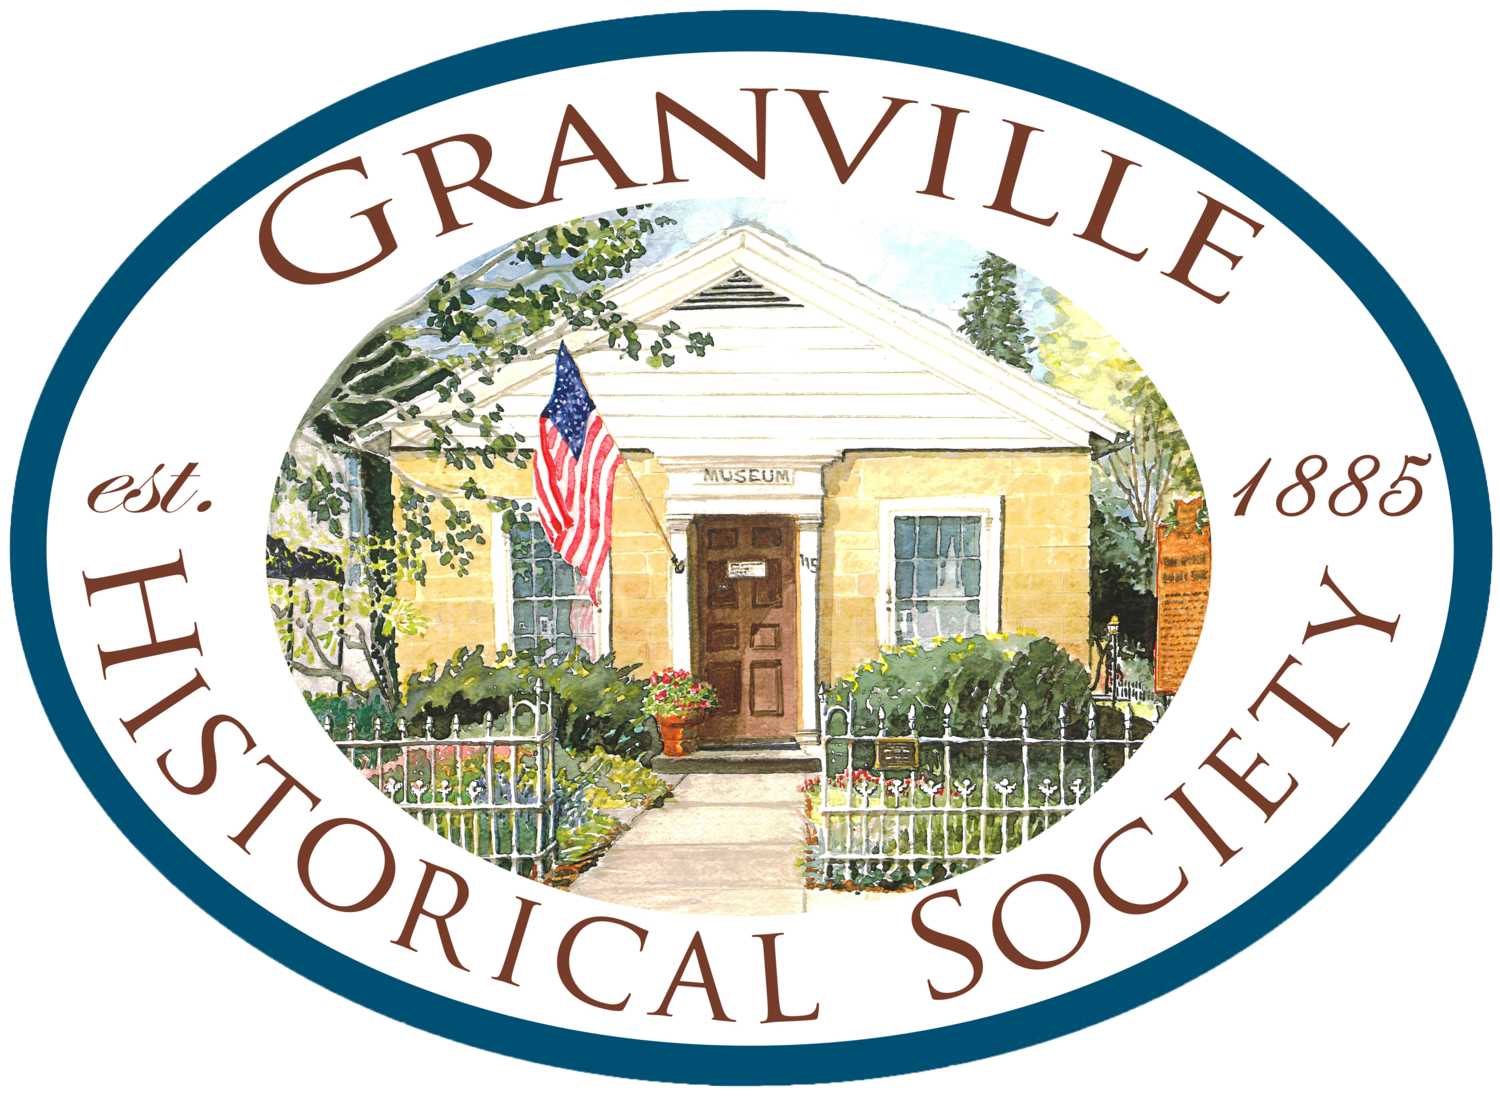 The Granville Historical Society